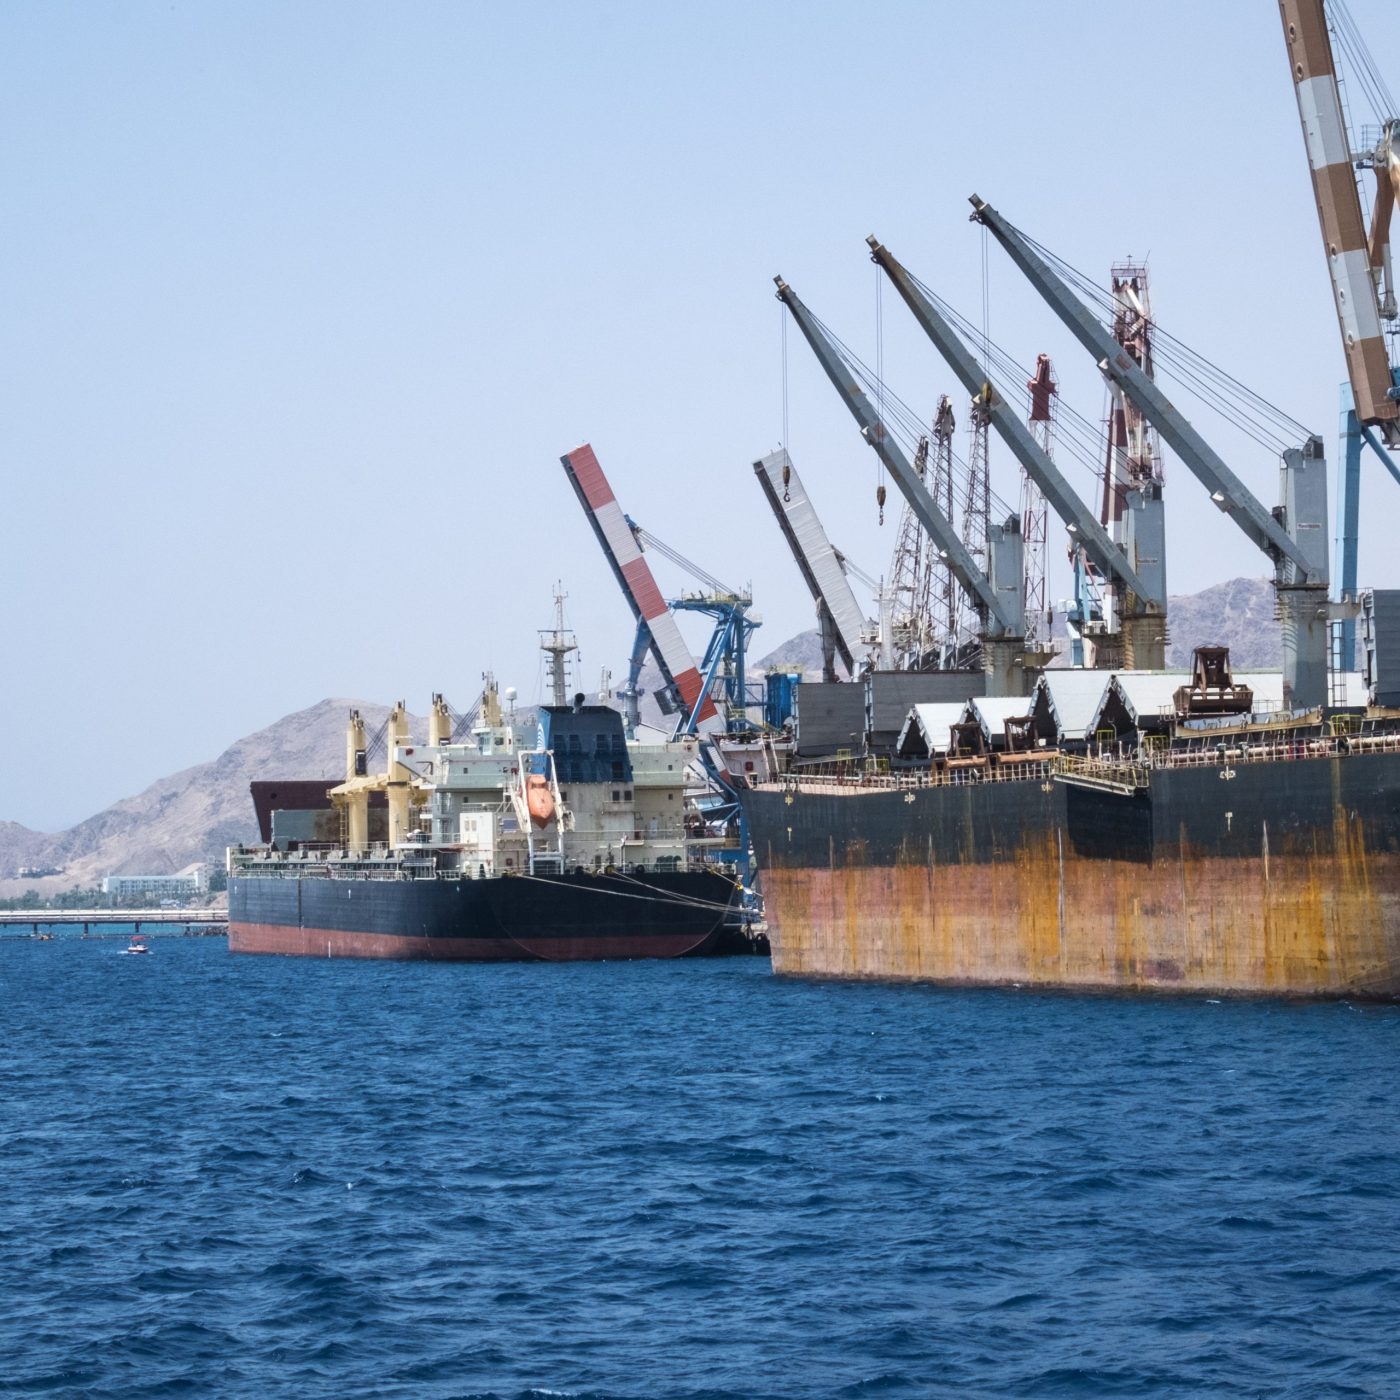 Cargo ships stand in the port of Eilat on the Red Sea (Israel)